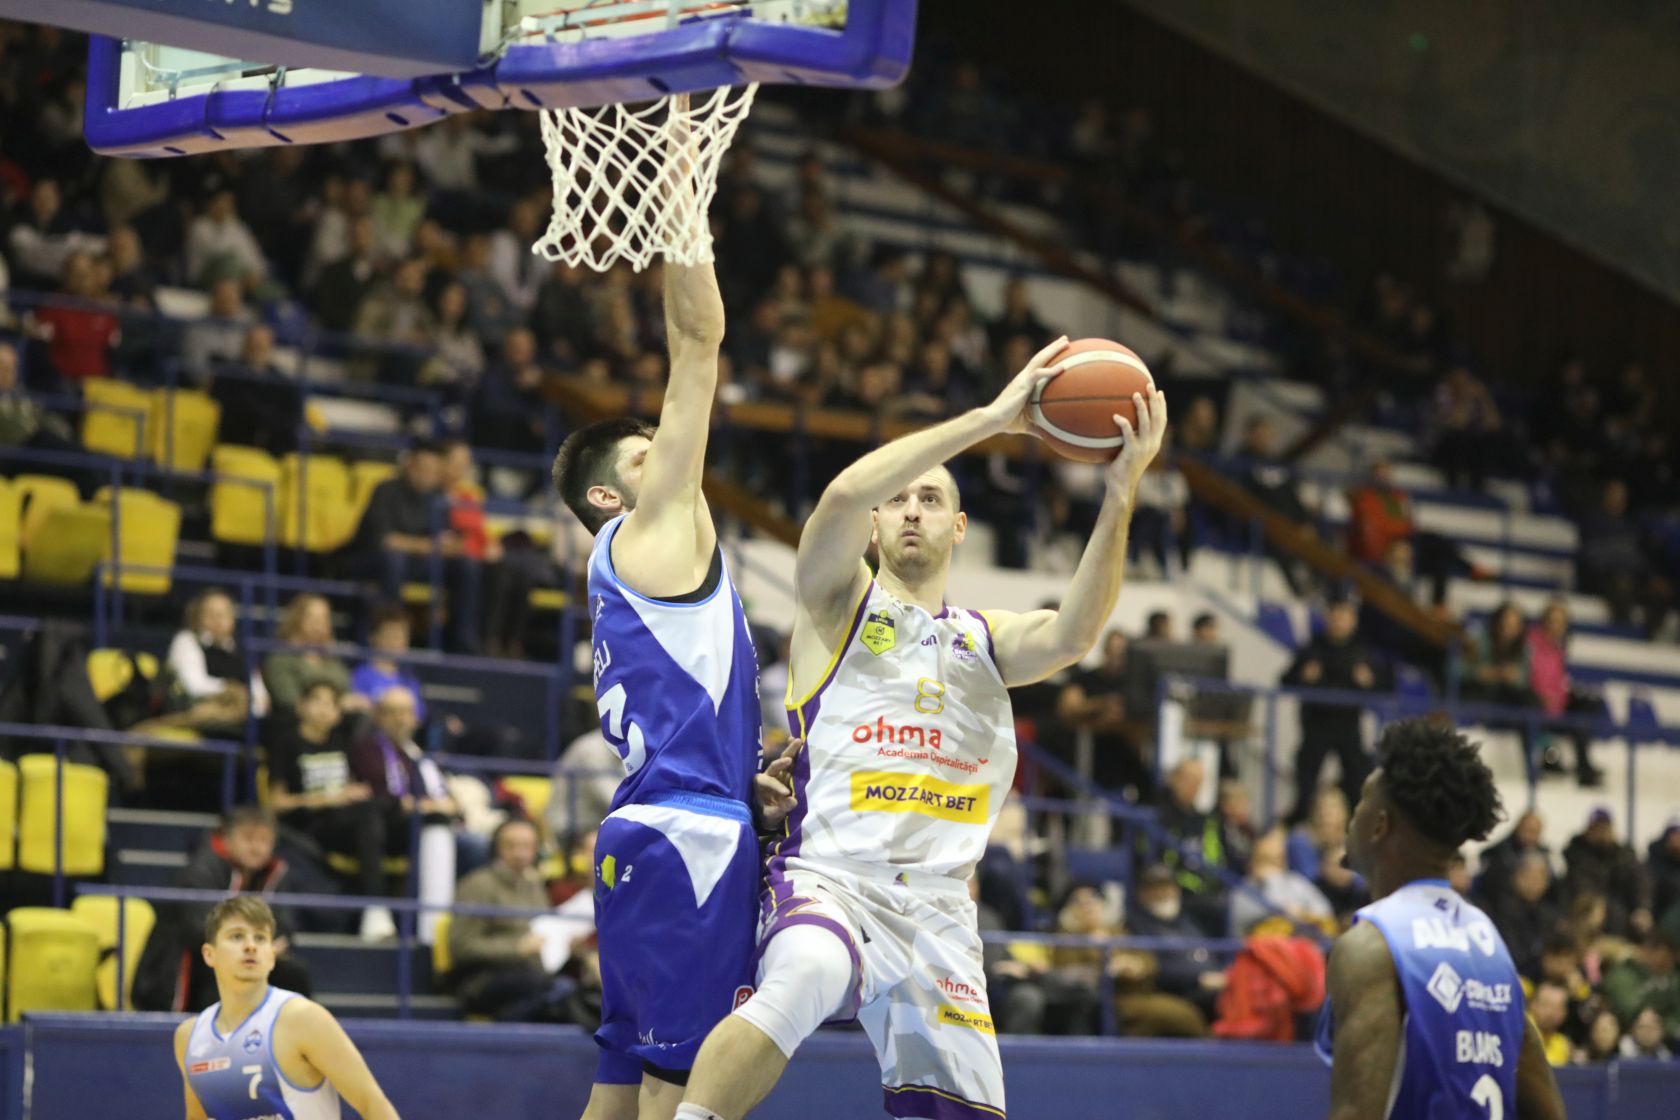 Timisoara’s victory was not enough to reach the semi-finals